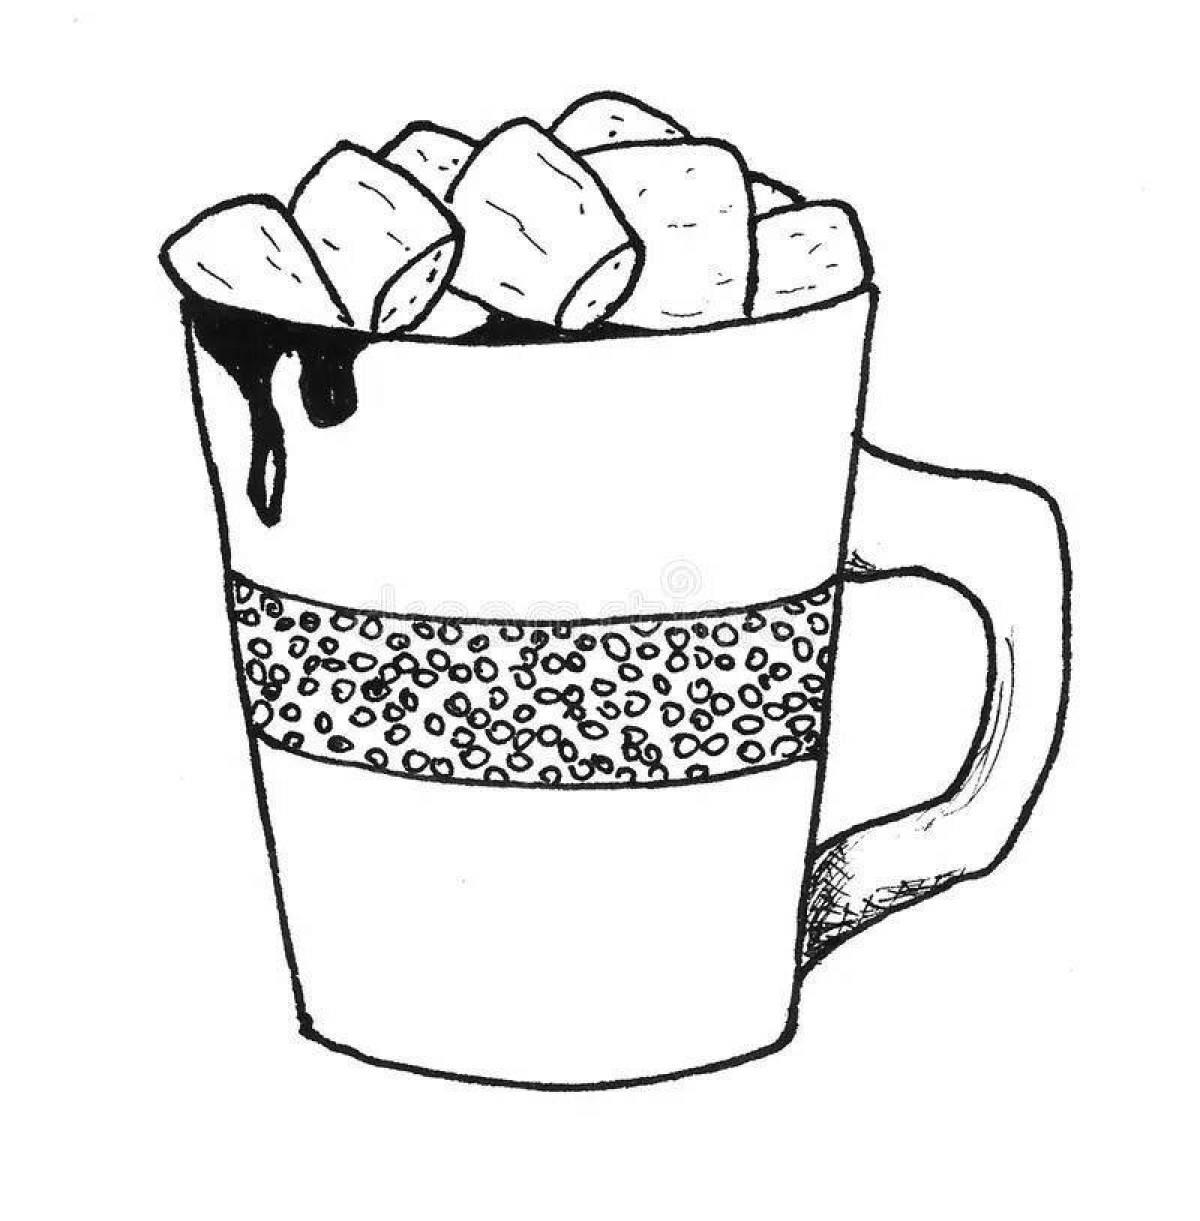 Rampant cocoa coloring page